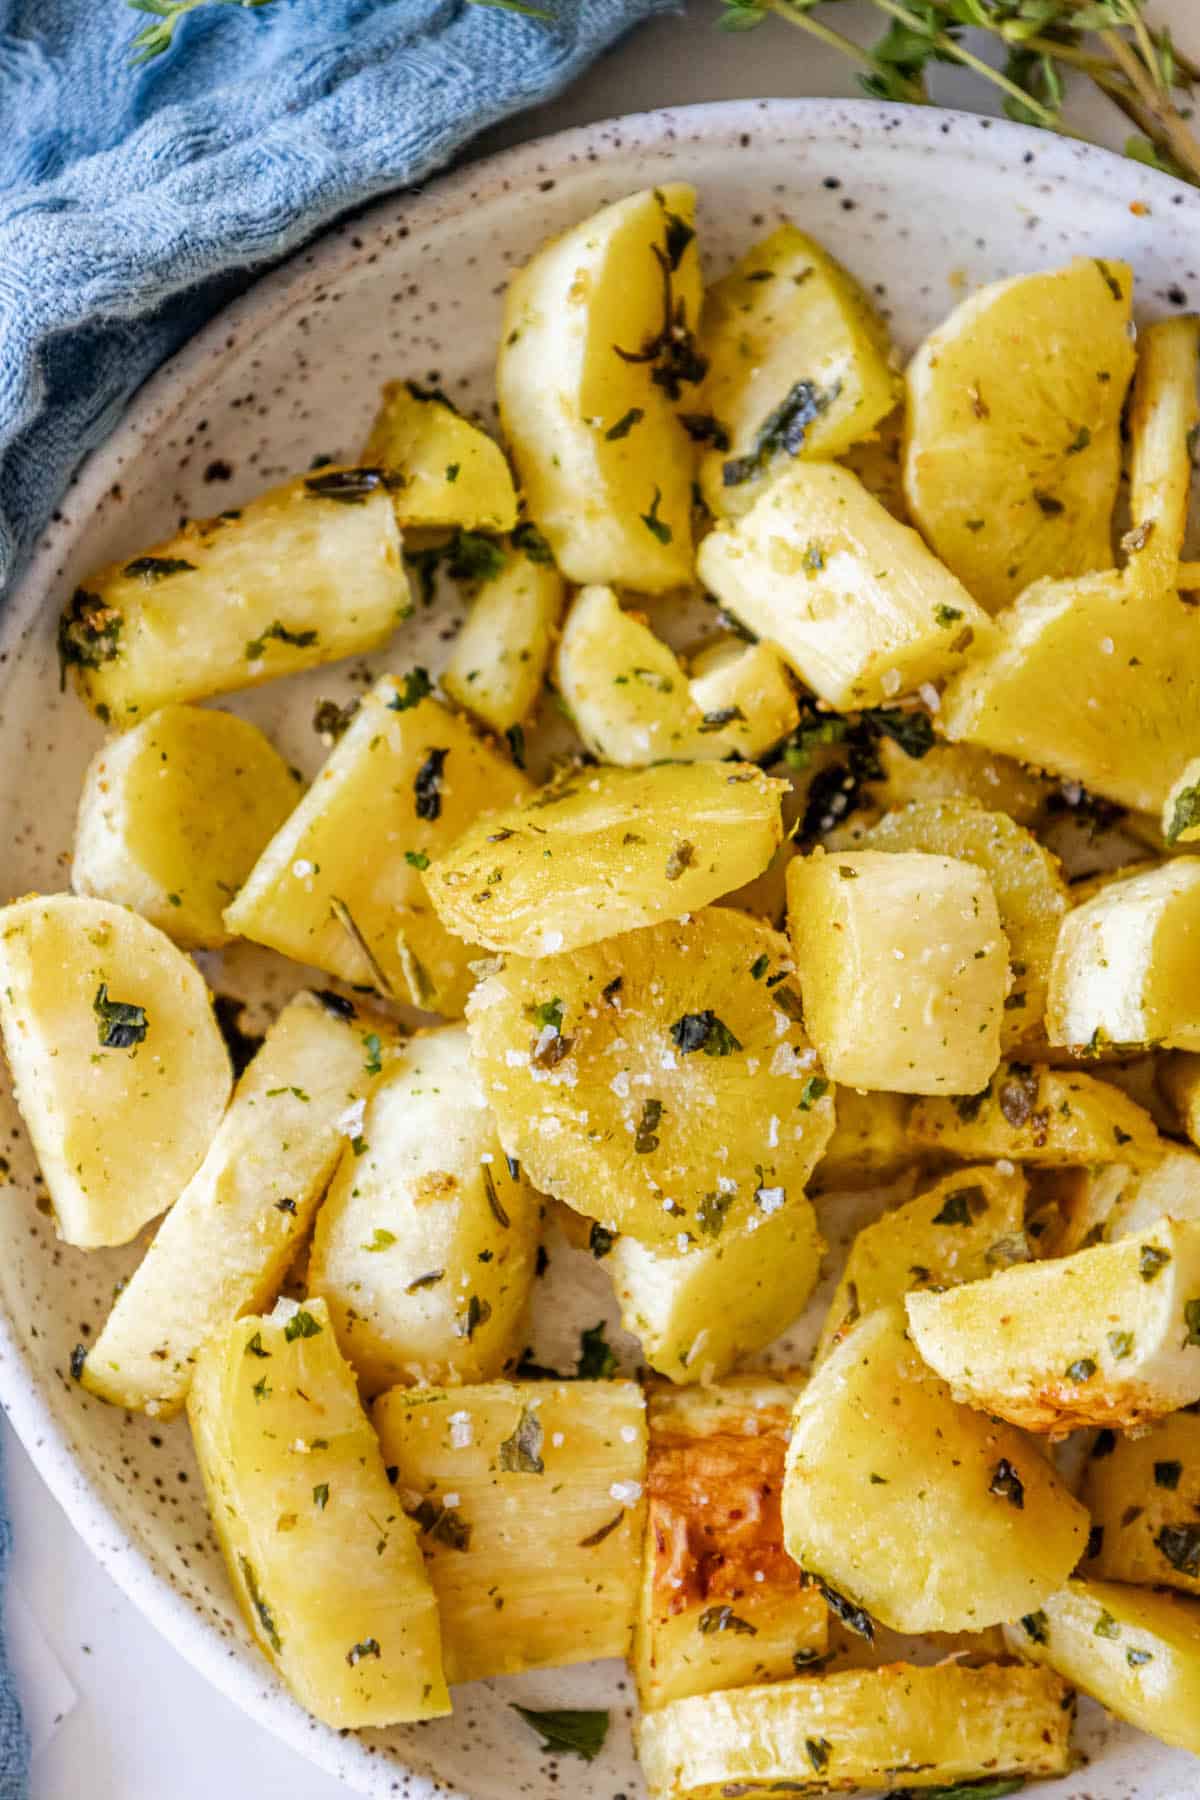 Roasted potatoes and parsnips in a white bowl with herbed thyme.